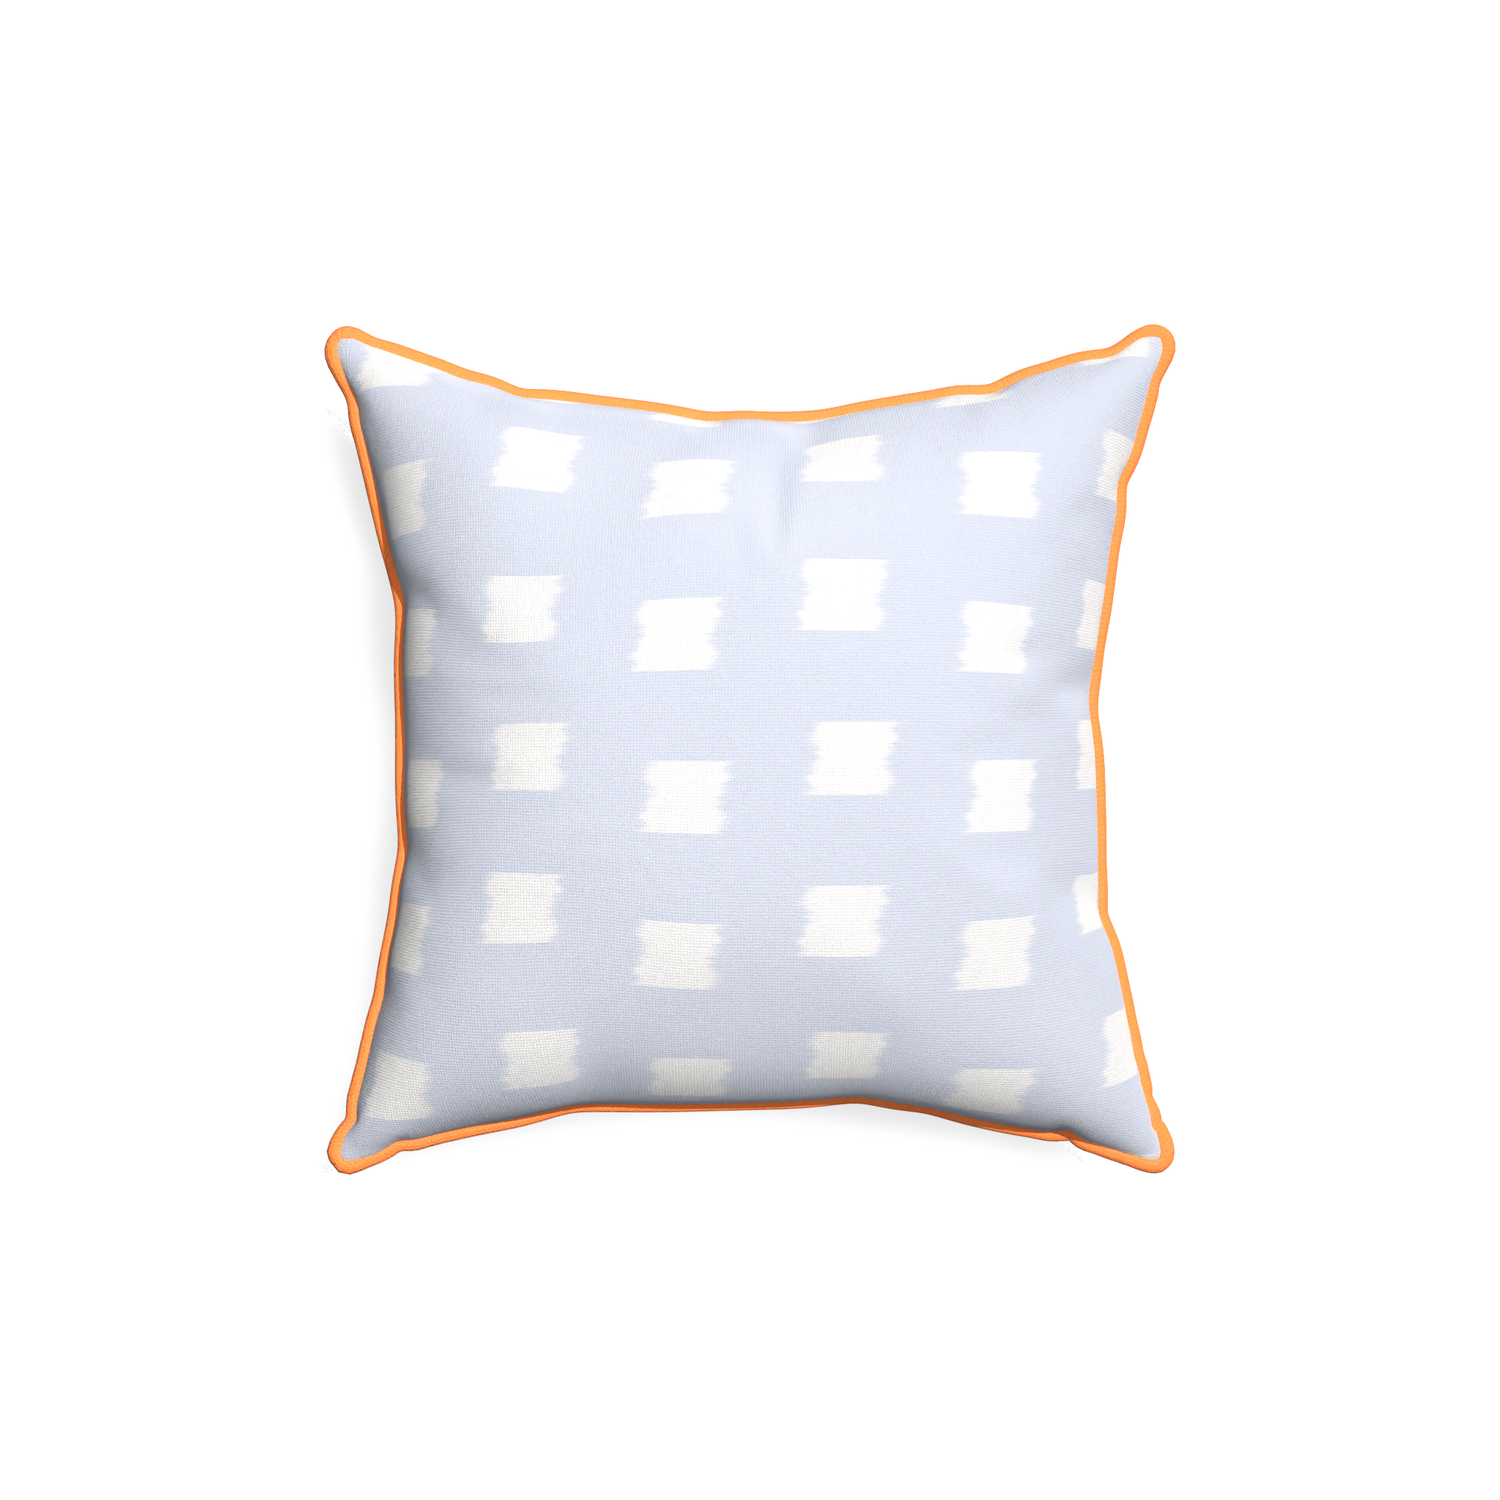 18-square denton custom sky blue patternpillow with clementine piping on white background